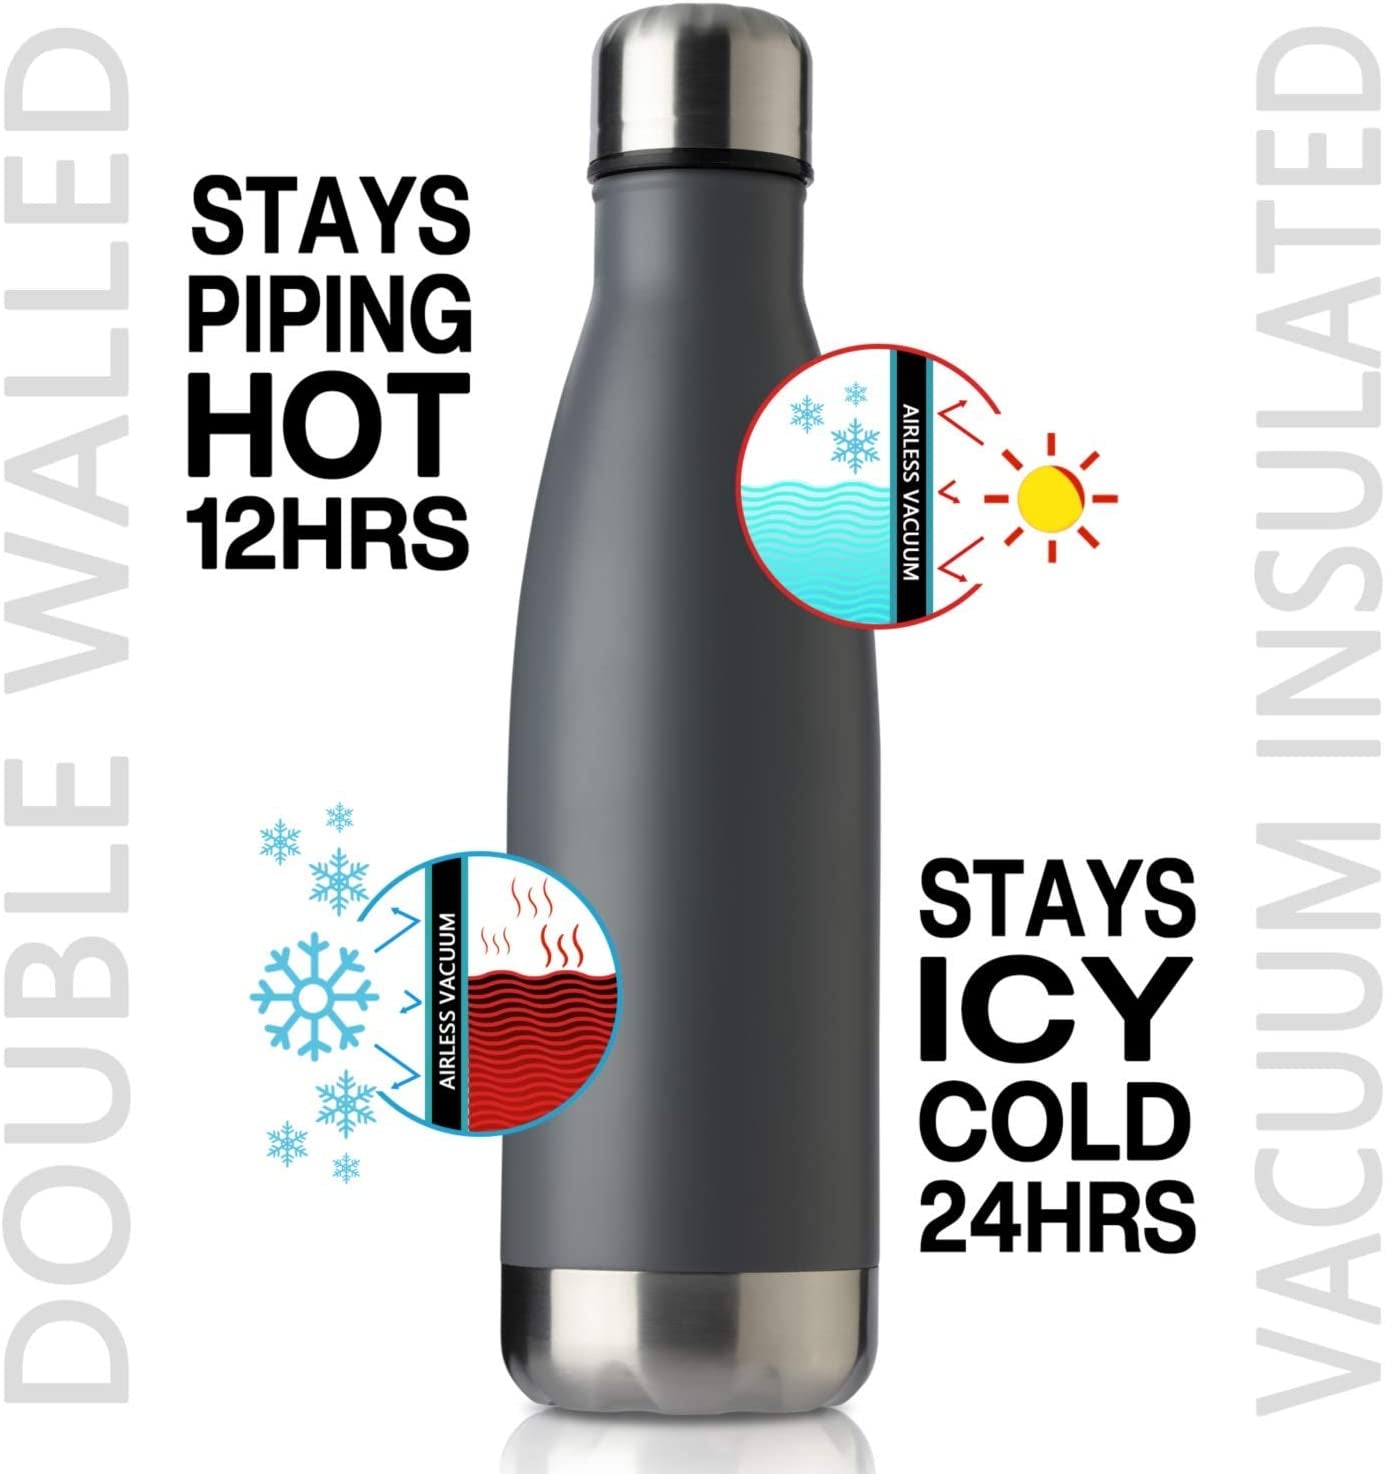 "Bundle of 12 - 17oz Vacuum Insulated Stainless Steel Sport Water Bottles - Leak-Proof, Double Wall Design for Temperature Control - Ideal for Hot and Cold Beverages - Sleek Cold Gray Color"